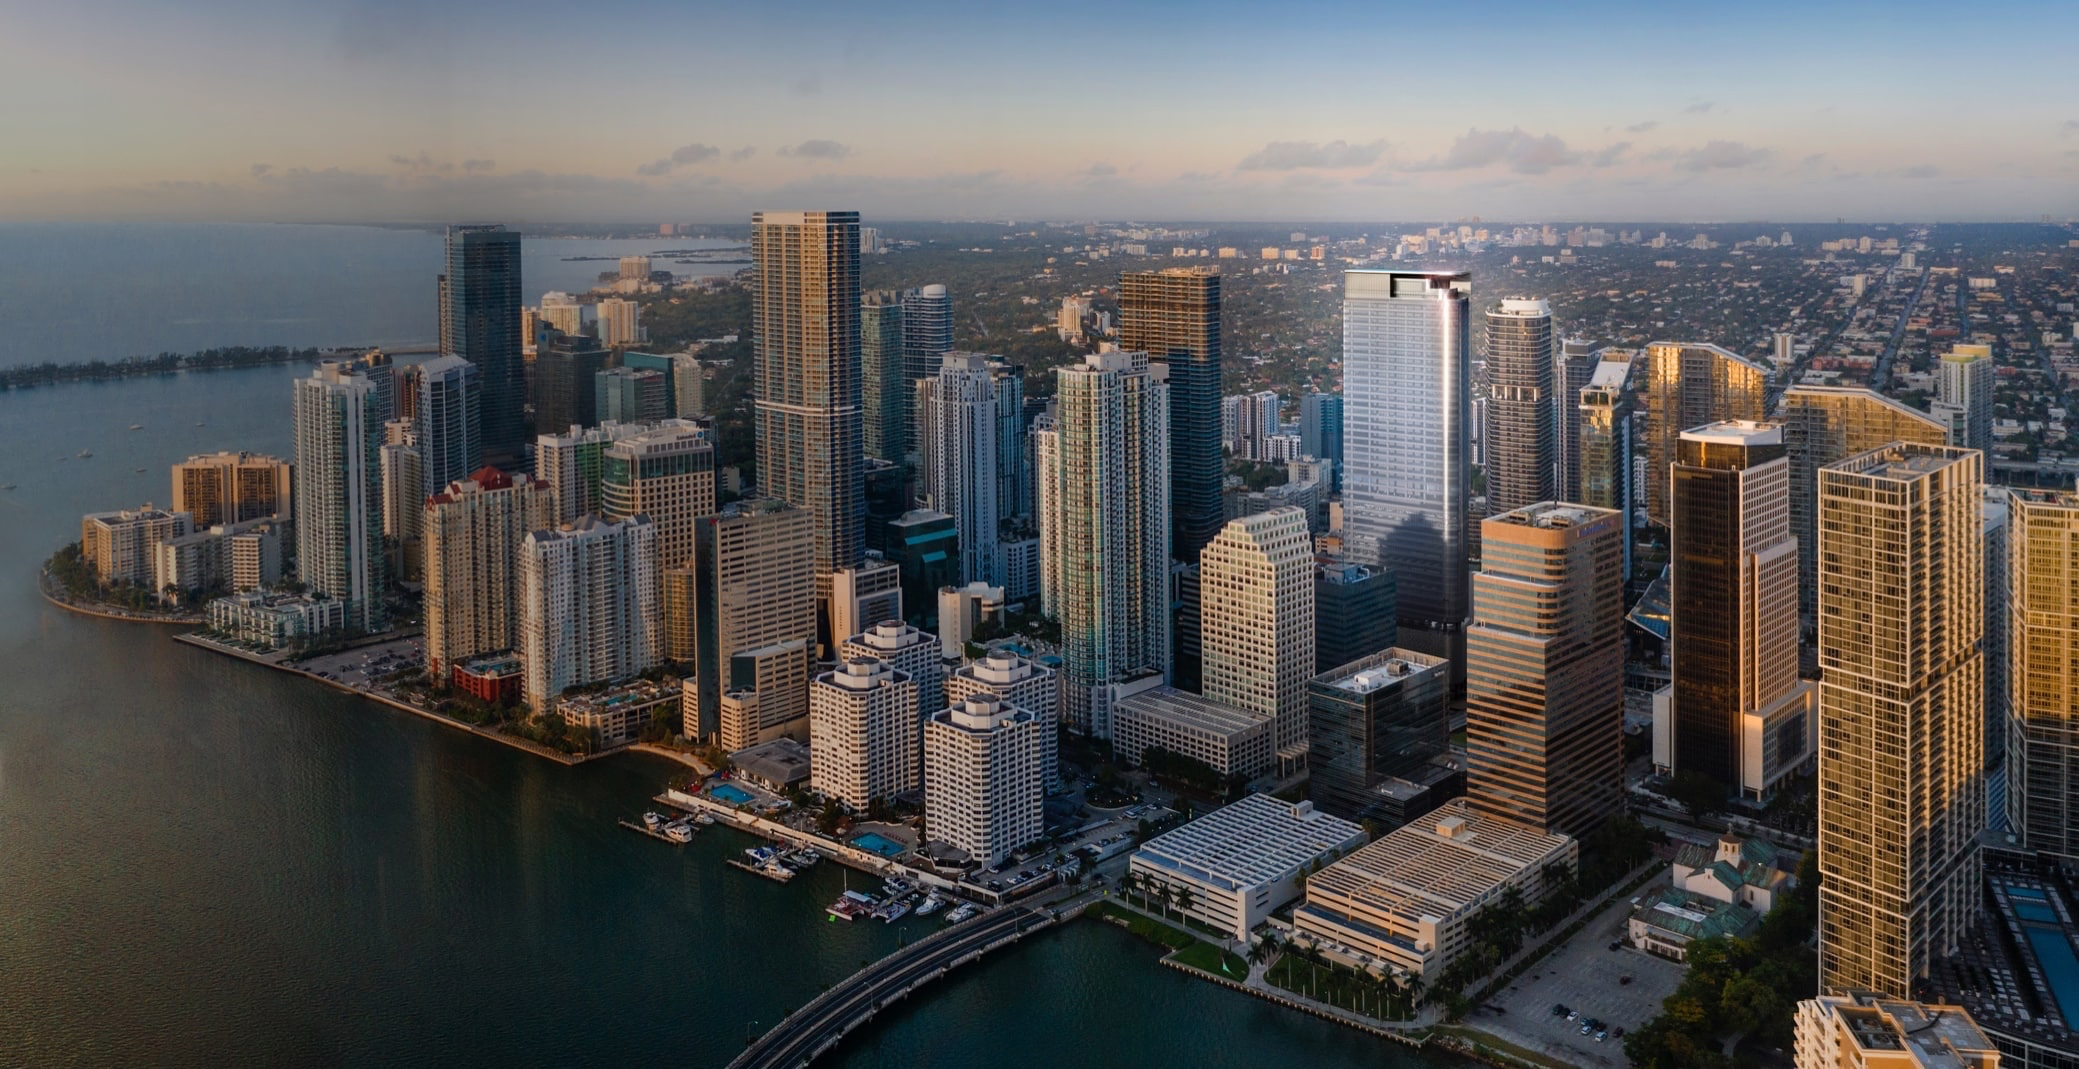 830 Brickell brings a premium commercial offering to the heart of Miami’s financial
center — as the area's first Class A+ freestanding office building to be built in over a decade. A
truly singular addition to the Downtown Miami skyline, this iconic office tower offers
unparalleled accommodation to the world’s leading companies.